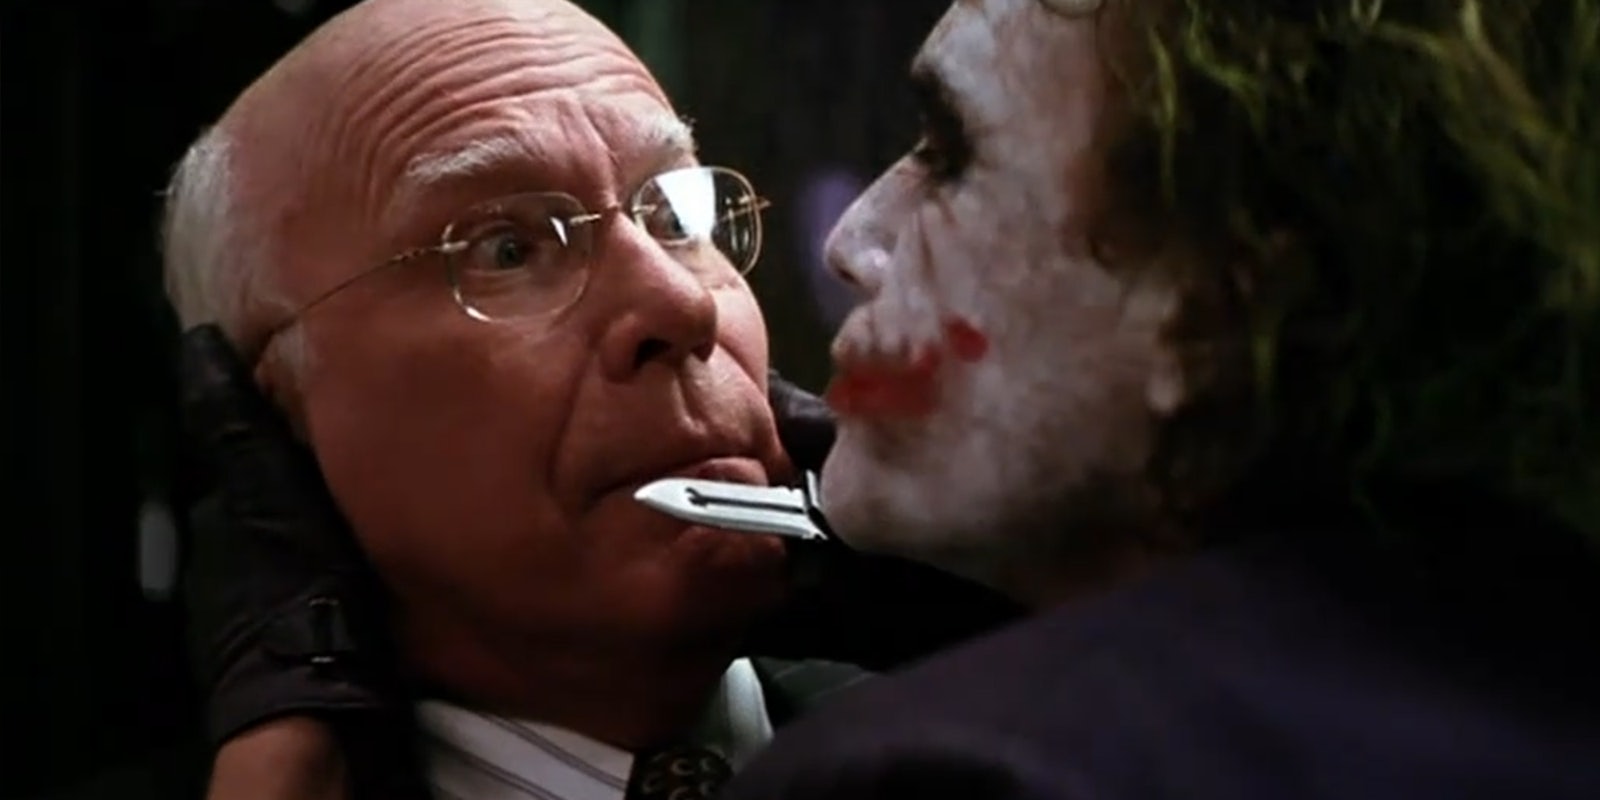 Joker holds a knife up to Senator Patrick Leahy in 'The Dark Knight'